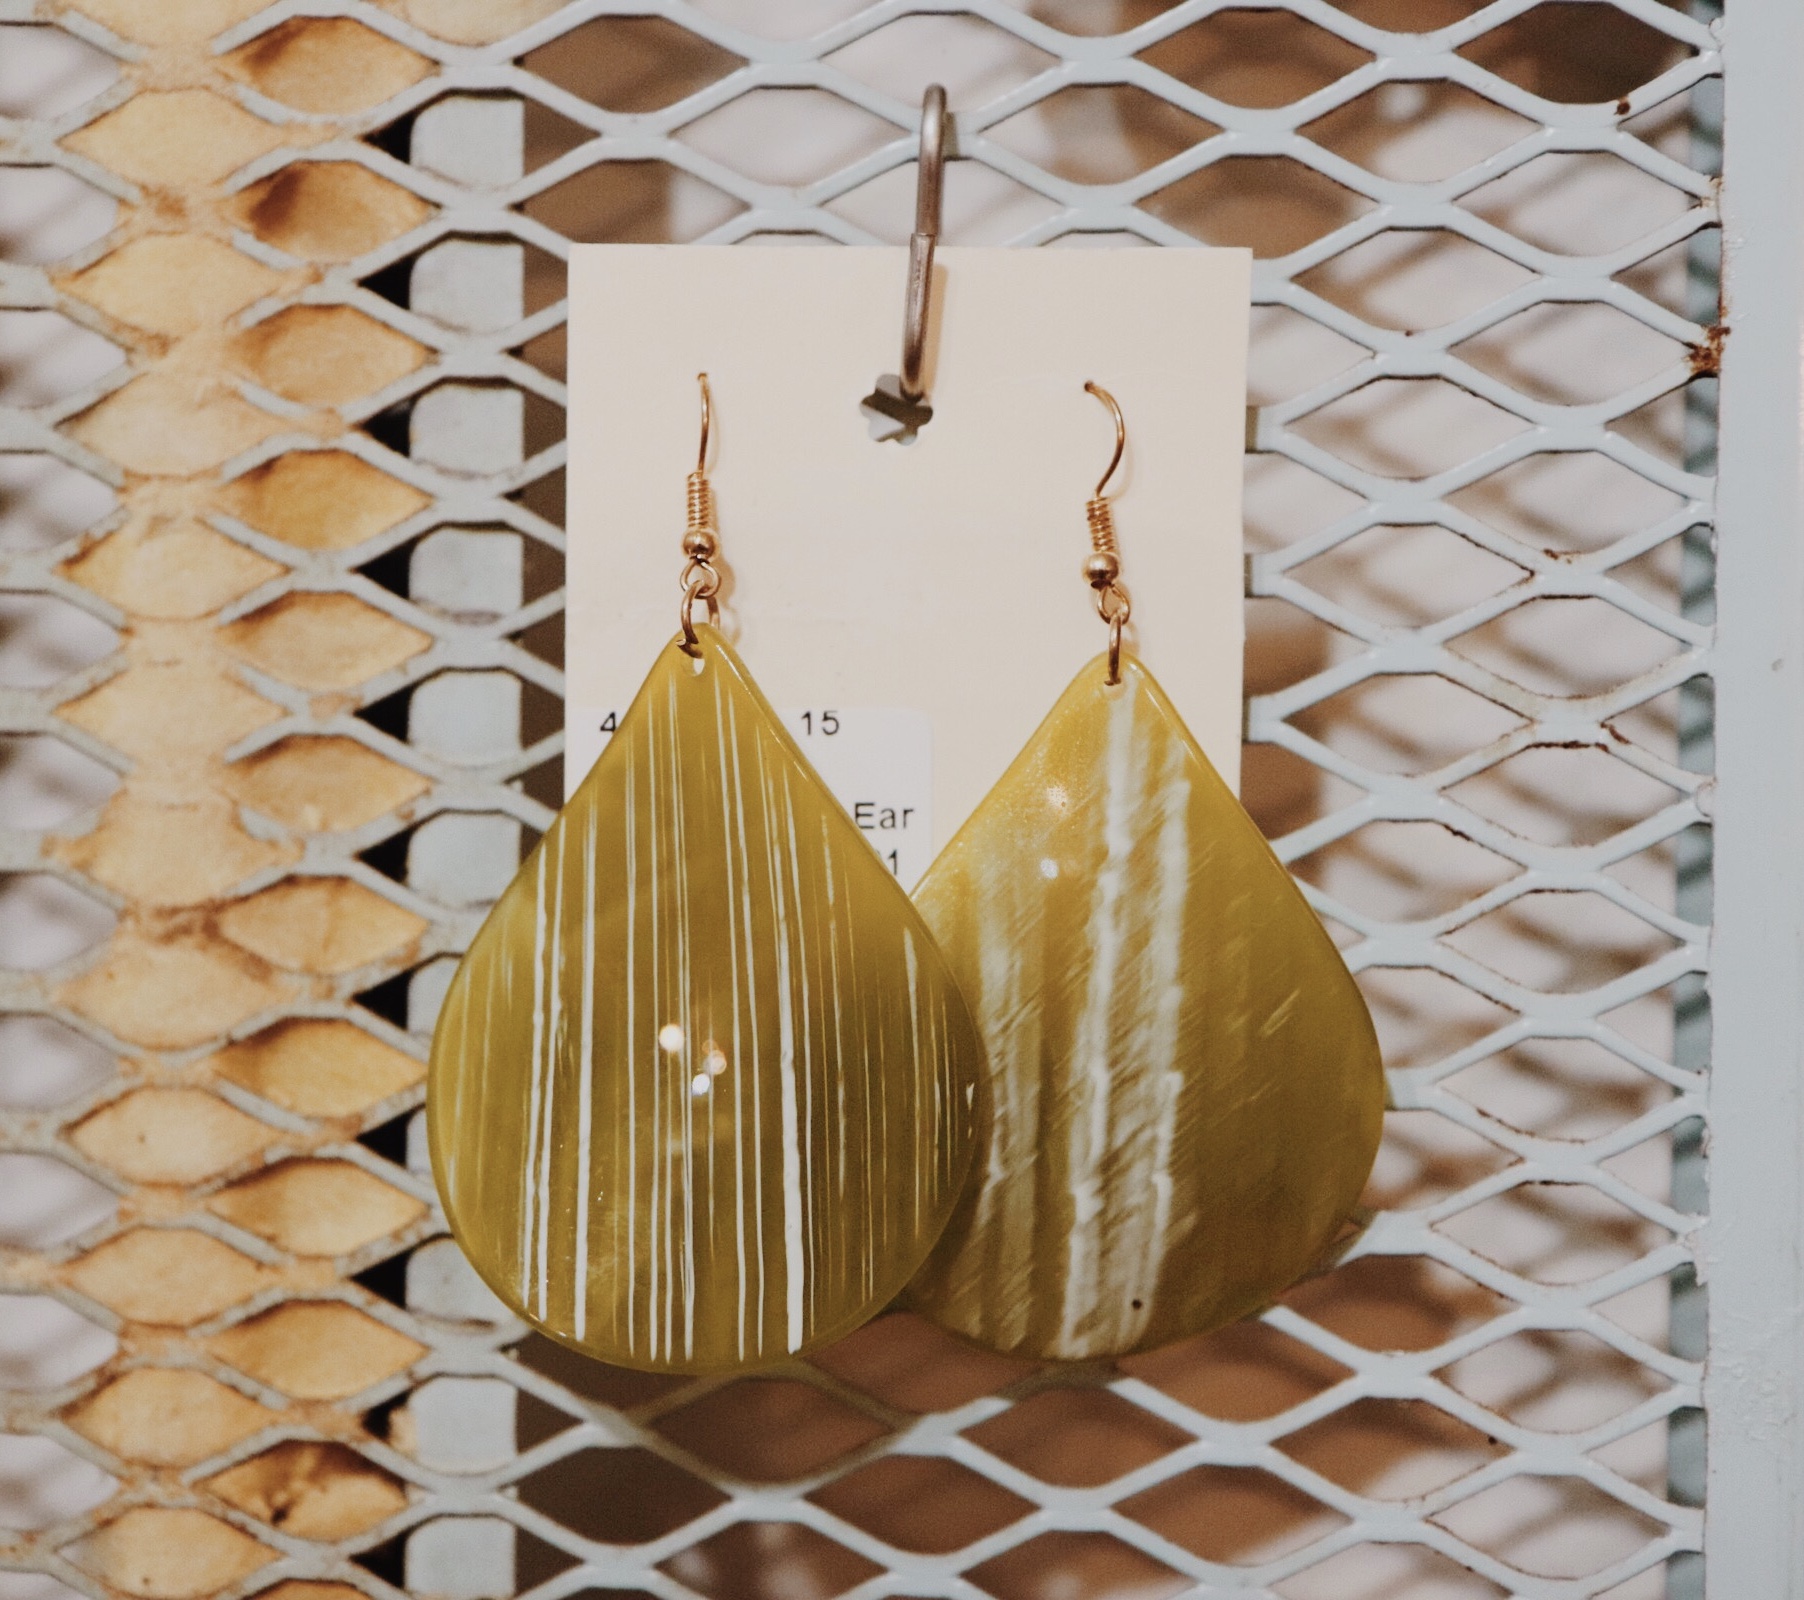 These gorgeous earrings measure 3 inches long!